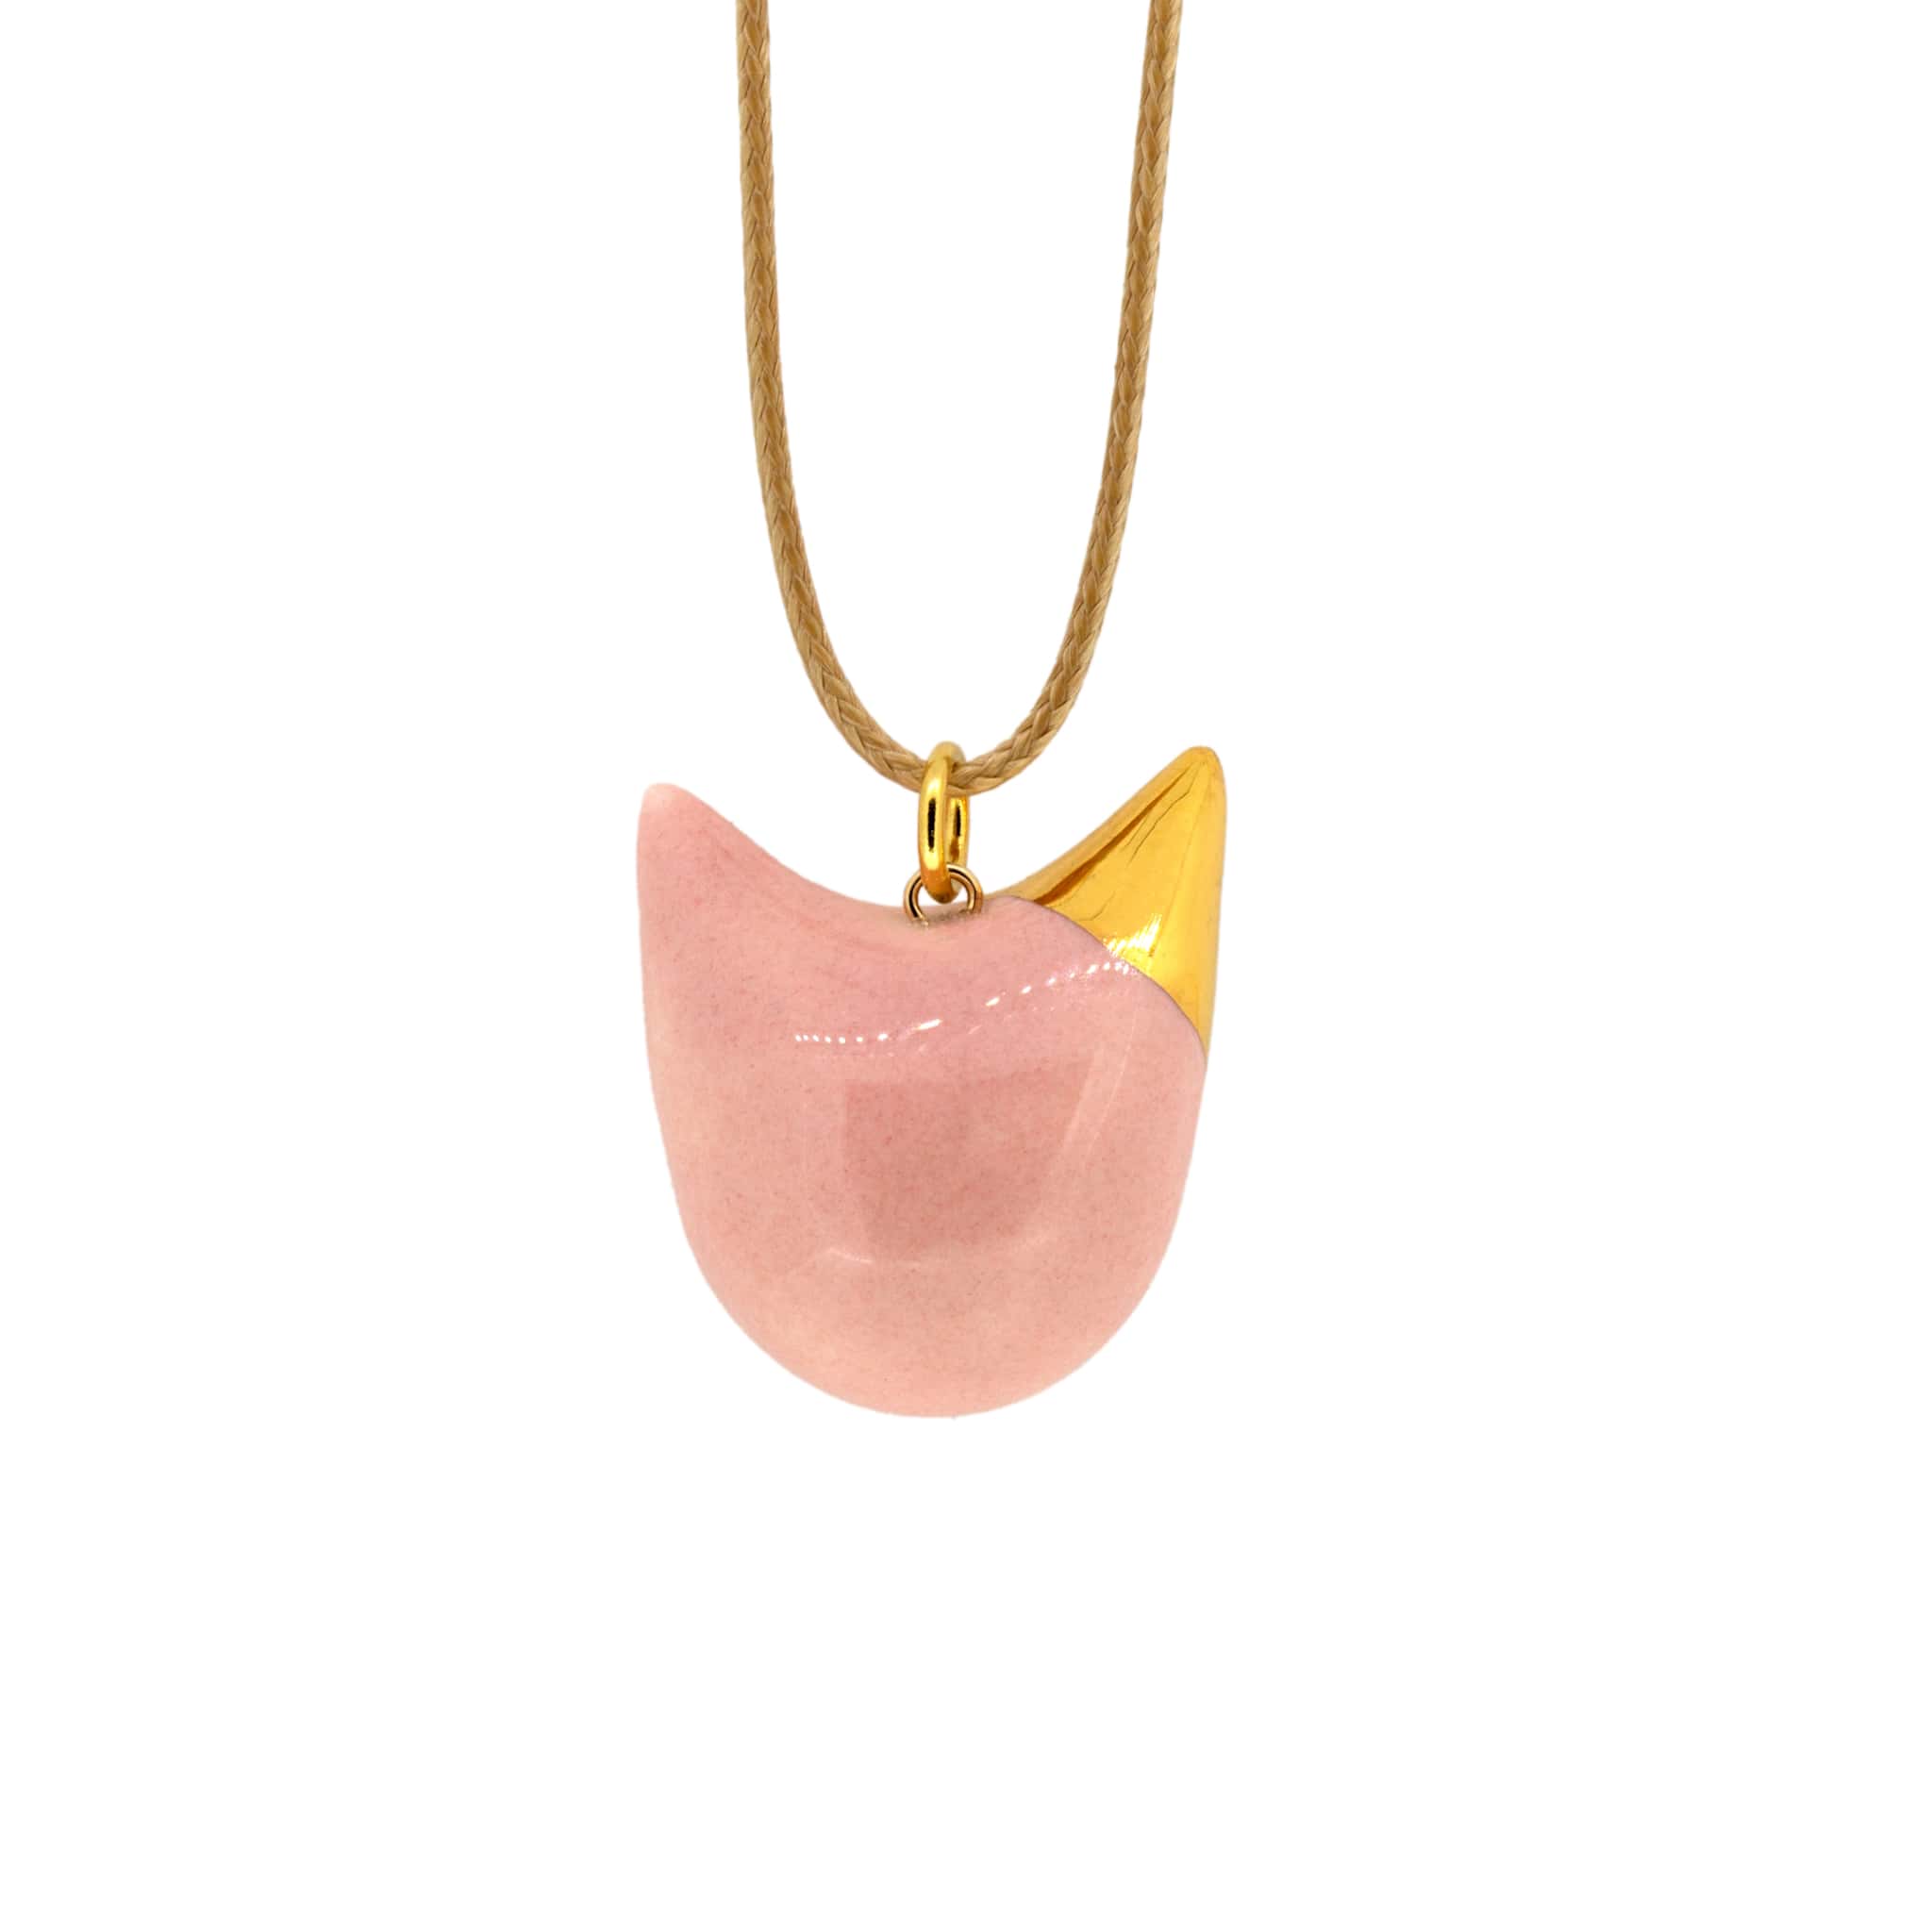 The Pink Cat Necklace With Golden Ear